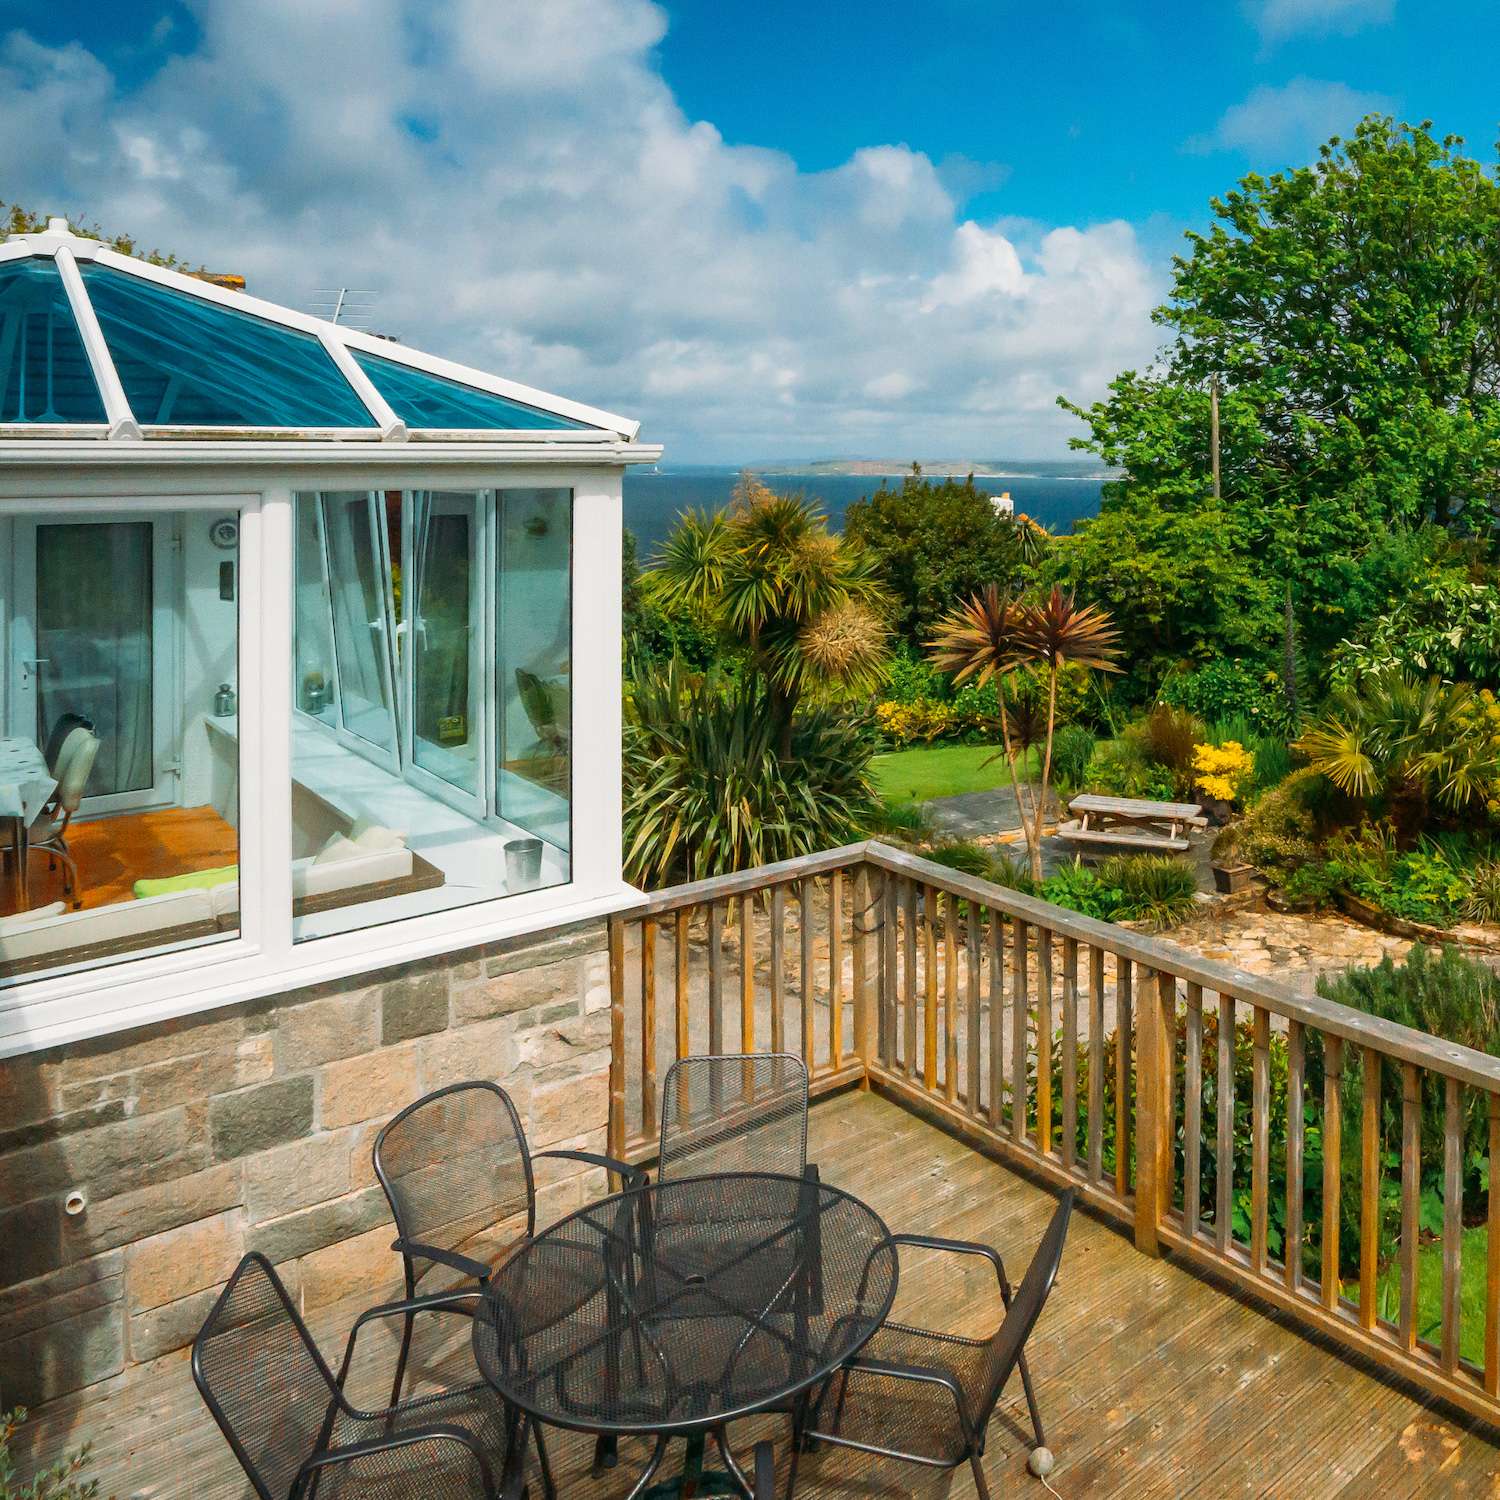 Sea view detached family home with glorious gardens and path to the beaches